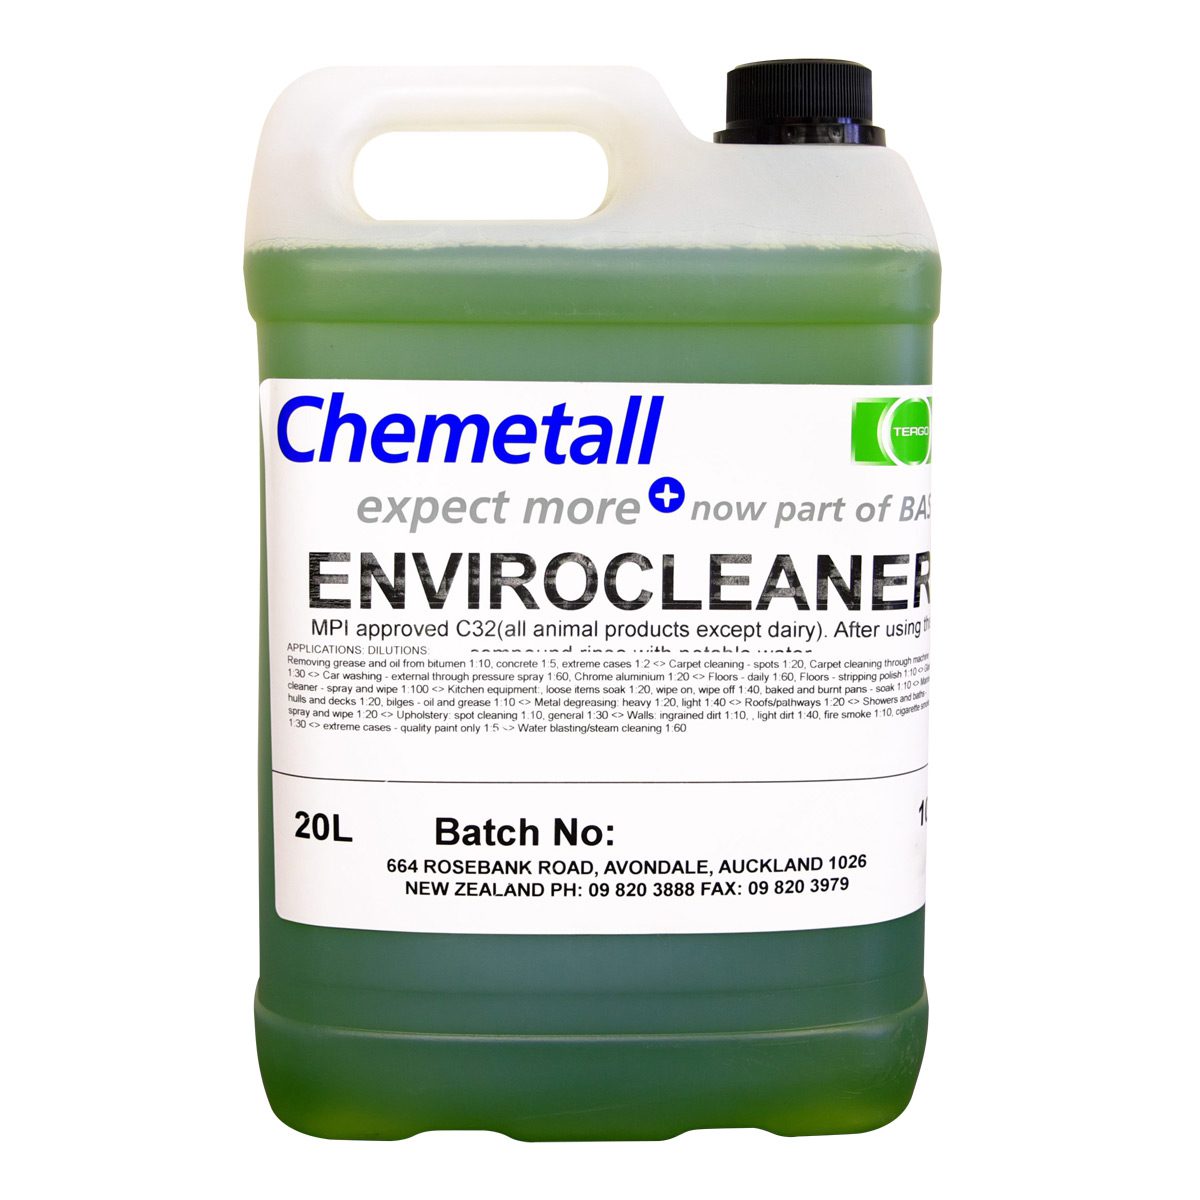 cleaning-products-kitchen-multipurpose-chemetall-enviro-cleaner-green-5L-litre-biodegradable-cleaner-broad-spectrum-disinfectant-seawater-compatible-for-marine-application-svjs-distributors-10025